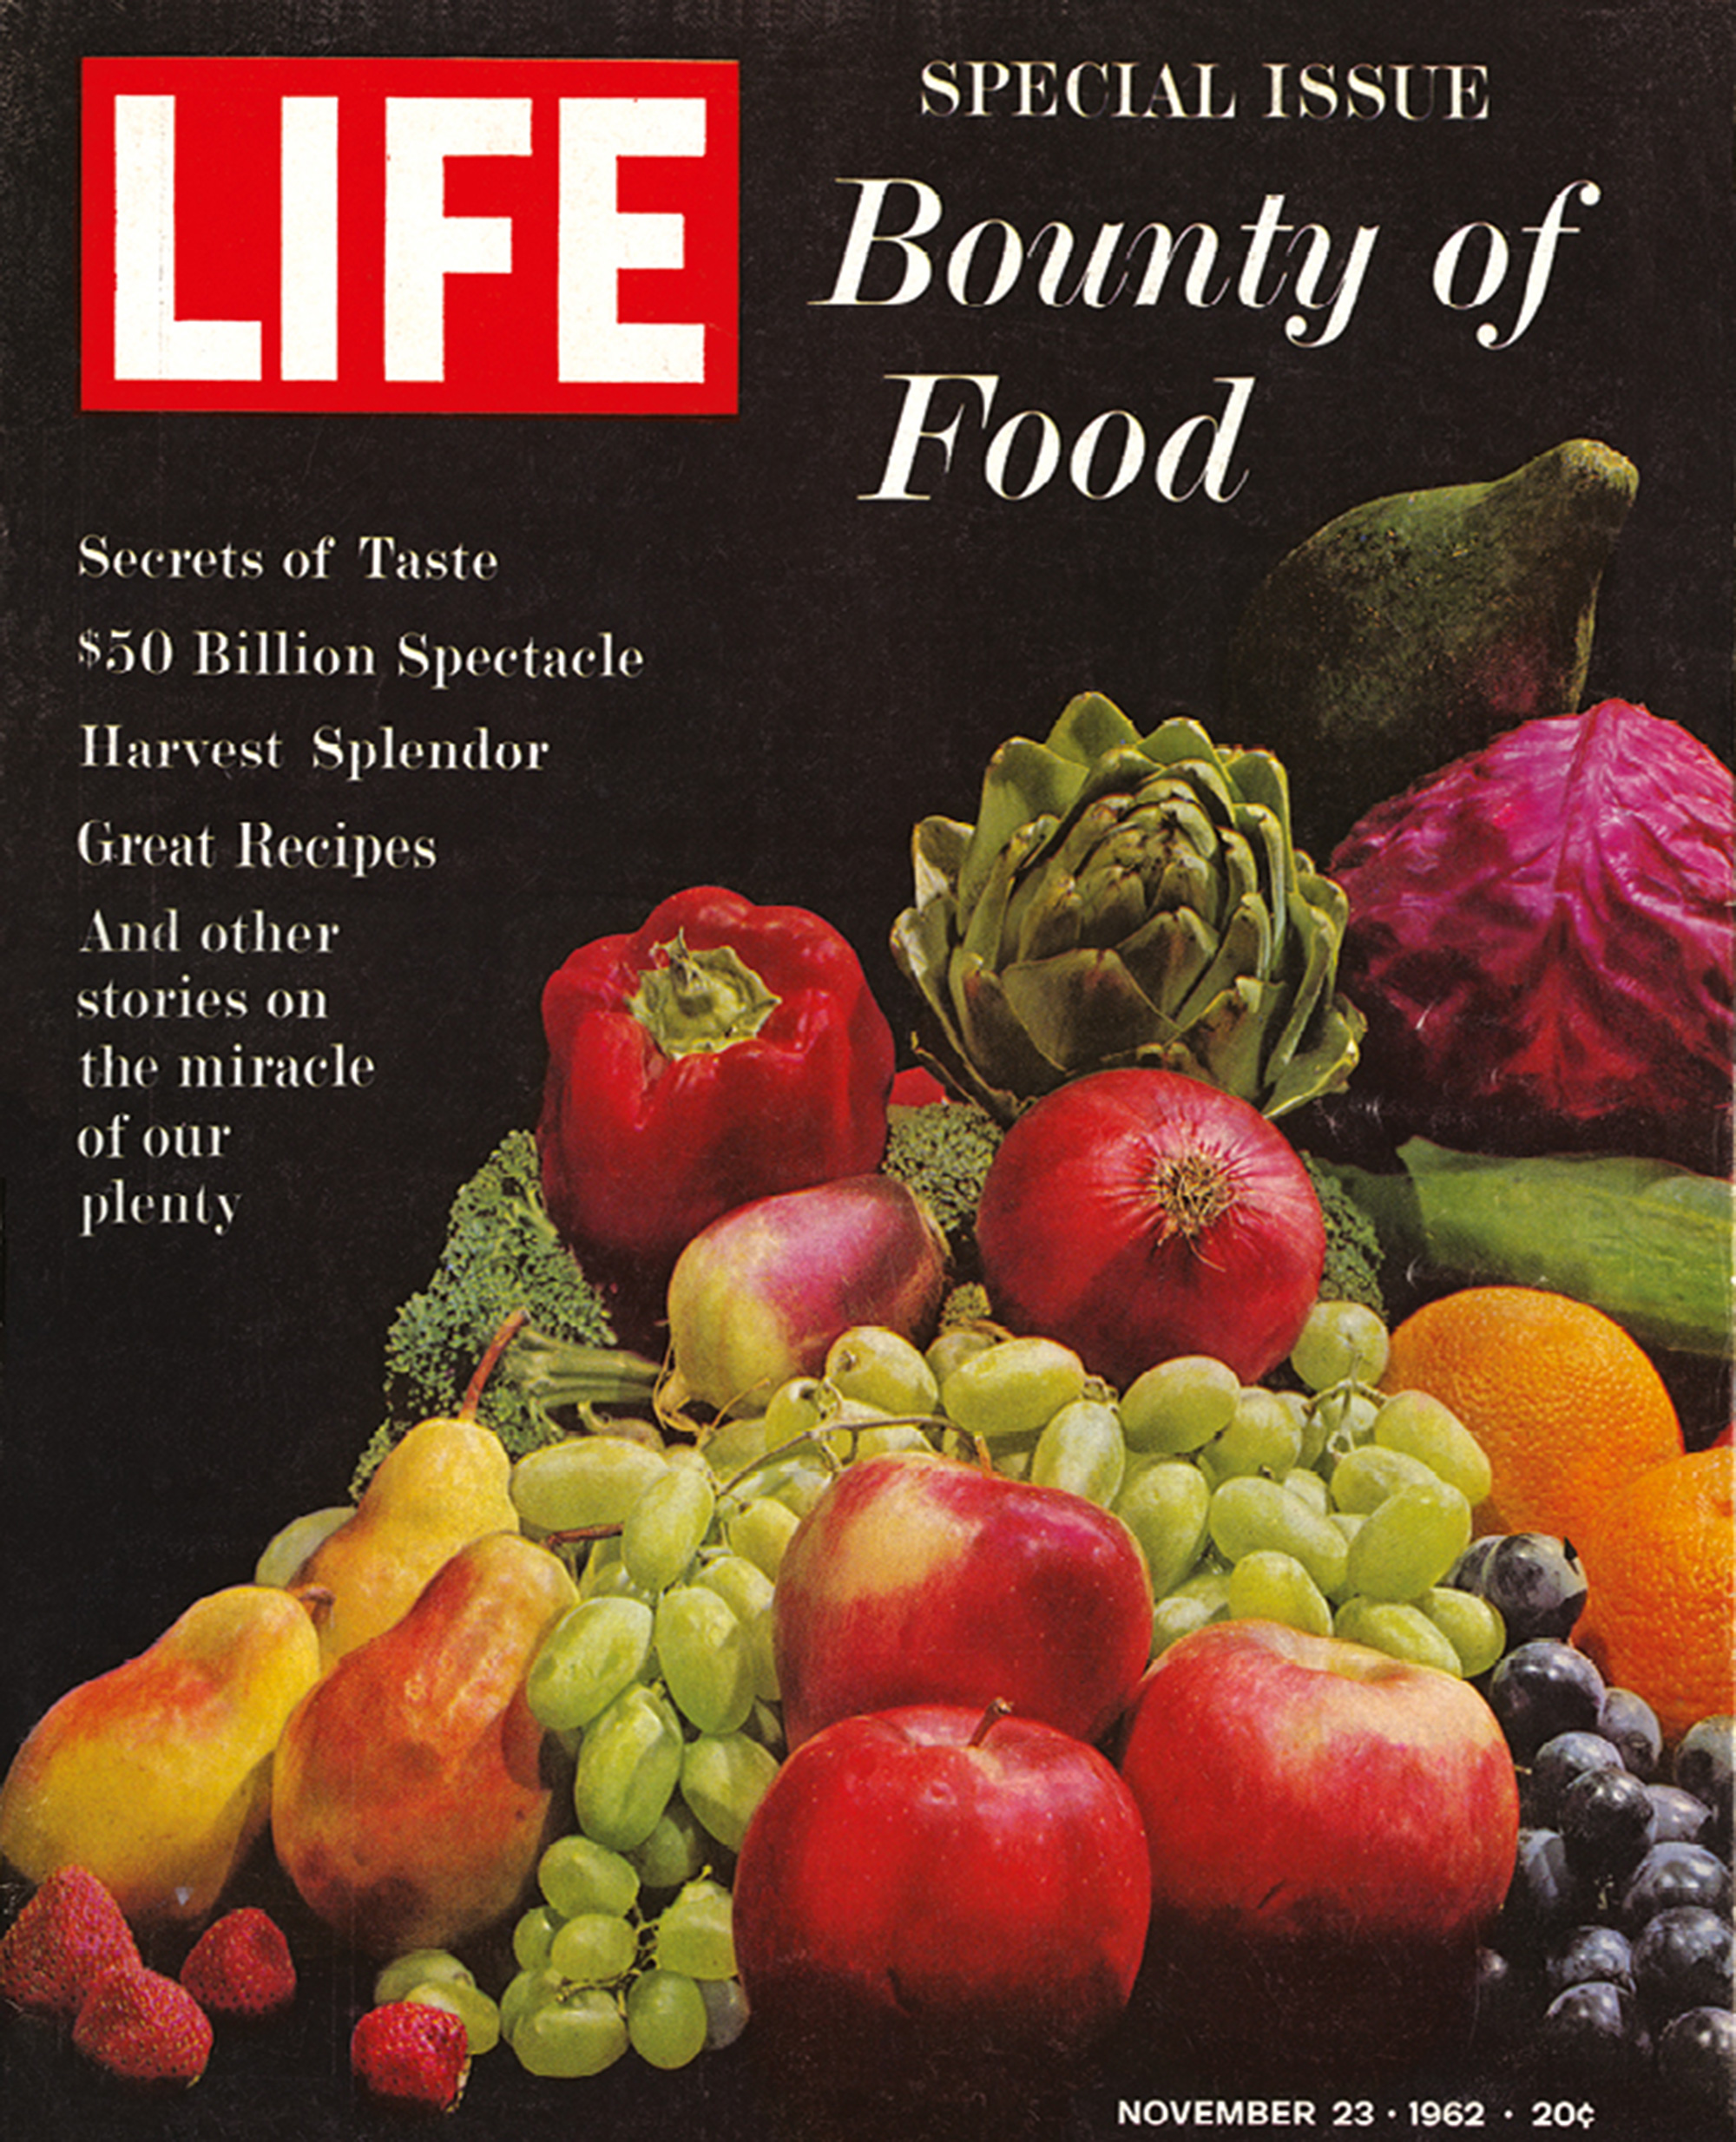 Life’s special “Bounty of Food” issue, 23 November 1962.